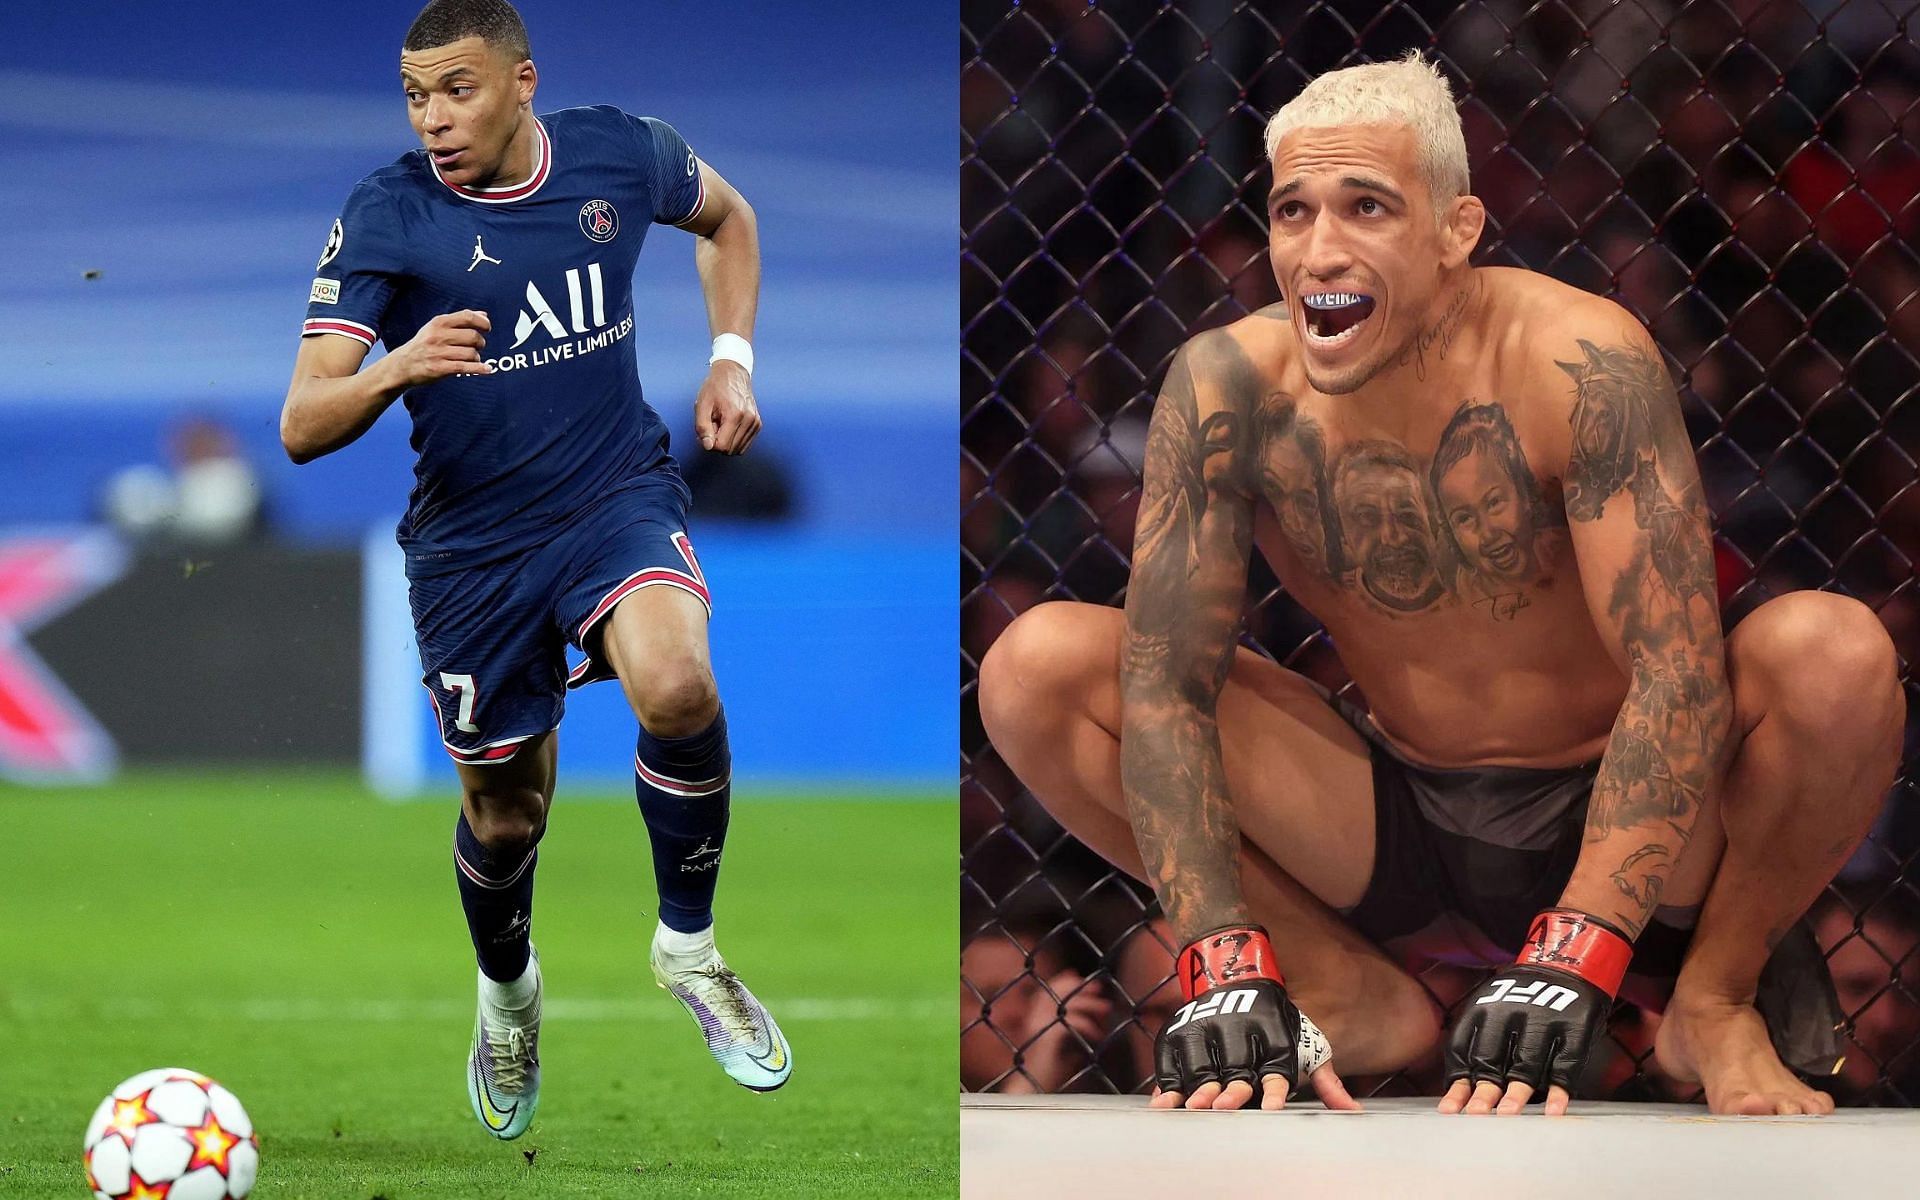 Kylian Mbappe (left) and Charles Oliveira (right) [Images courtesy of Getty]